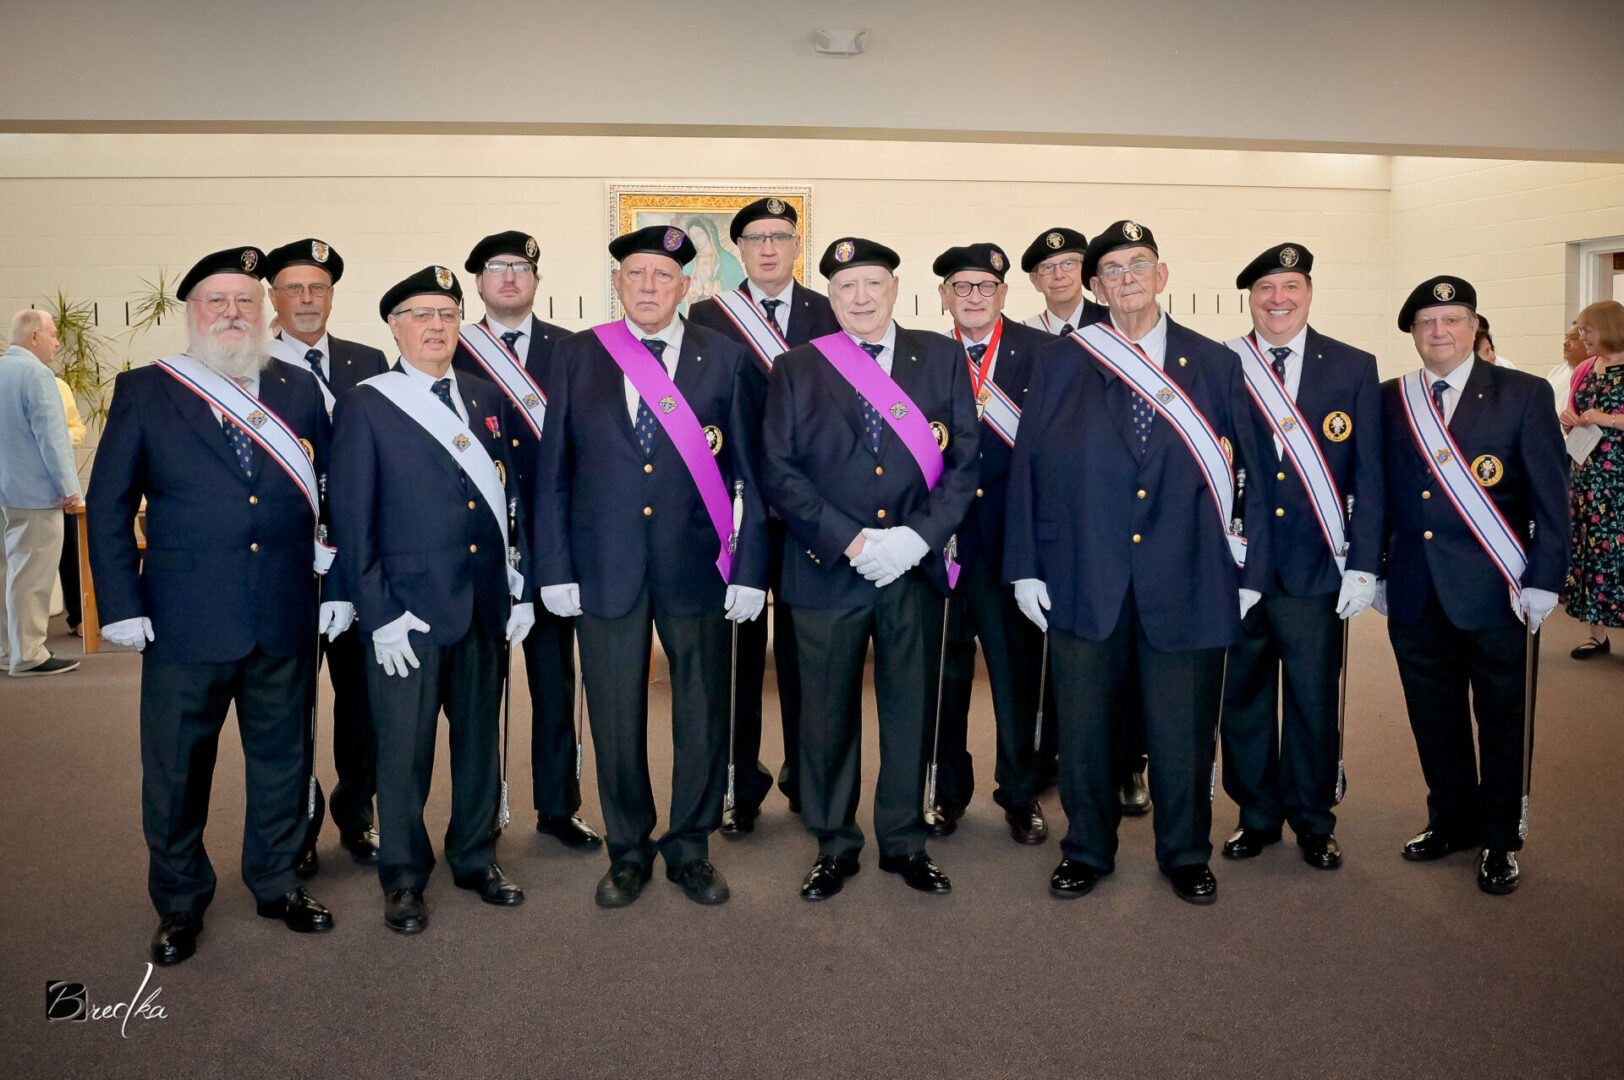 Men in formal attire and sashes